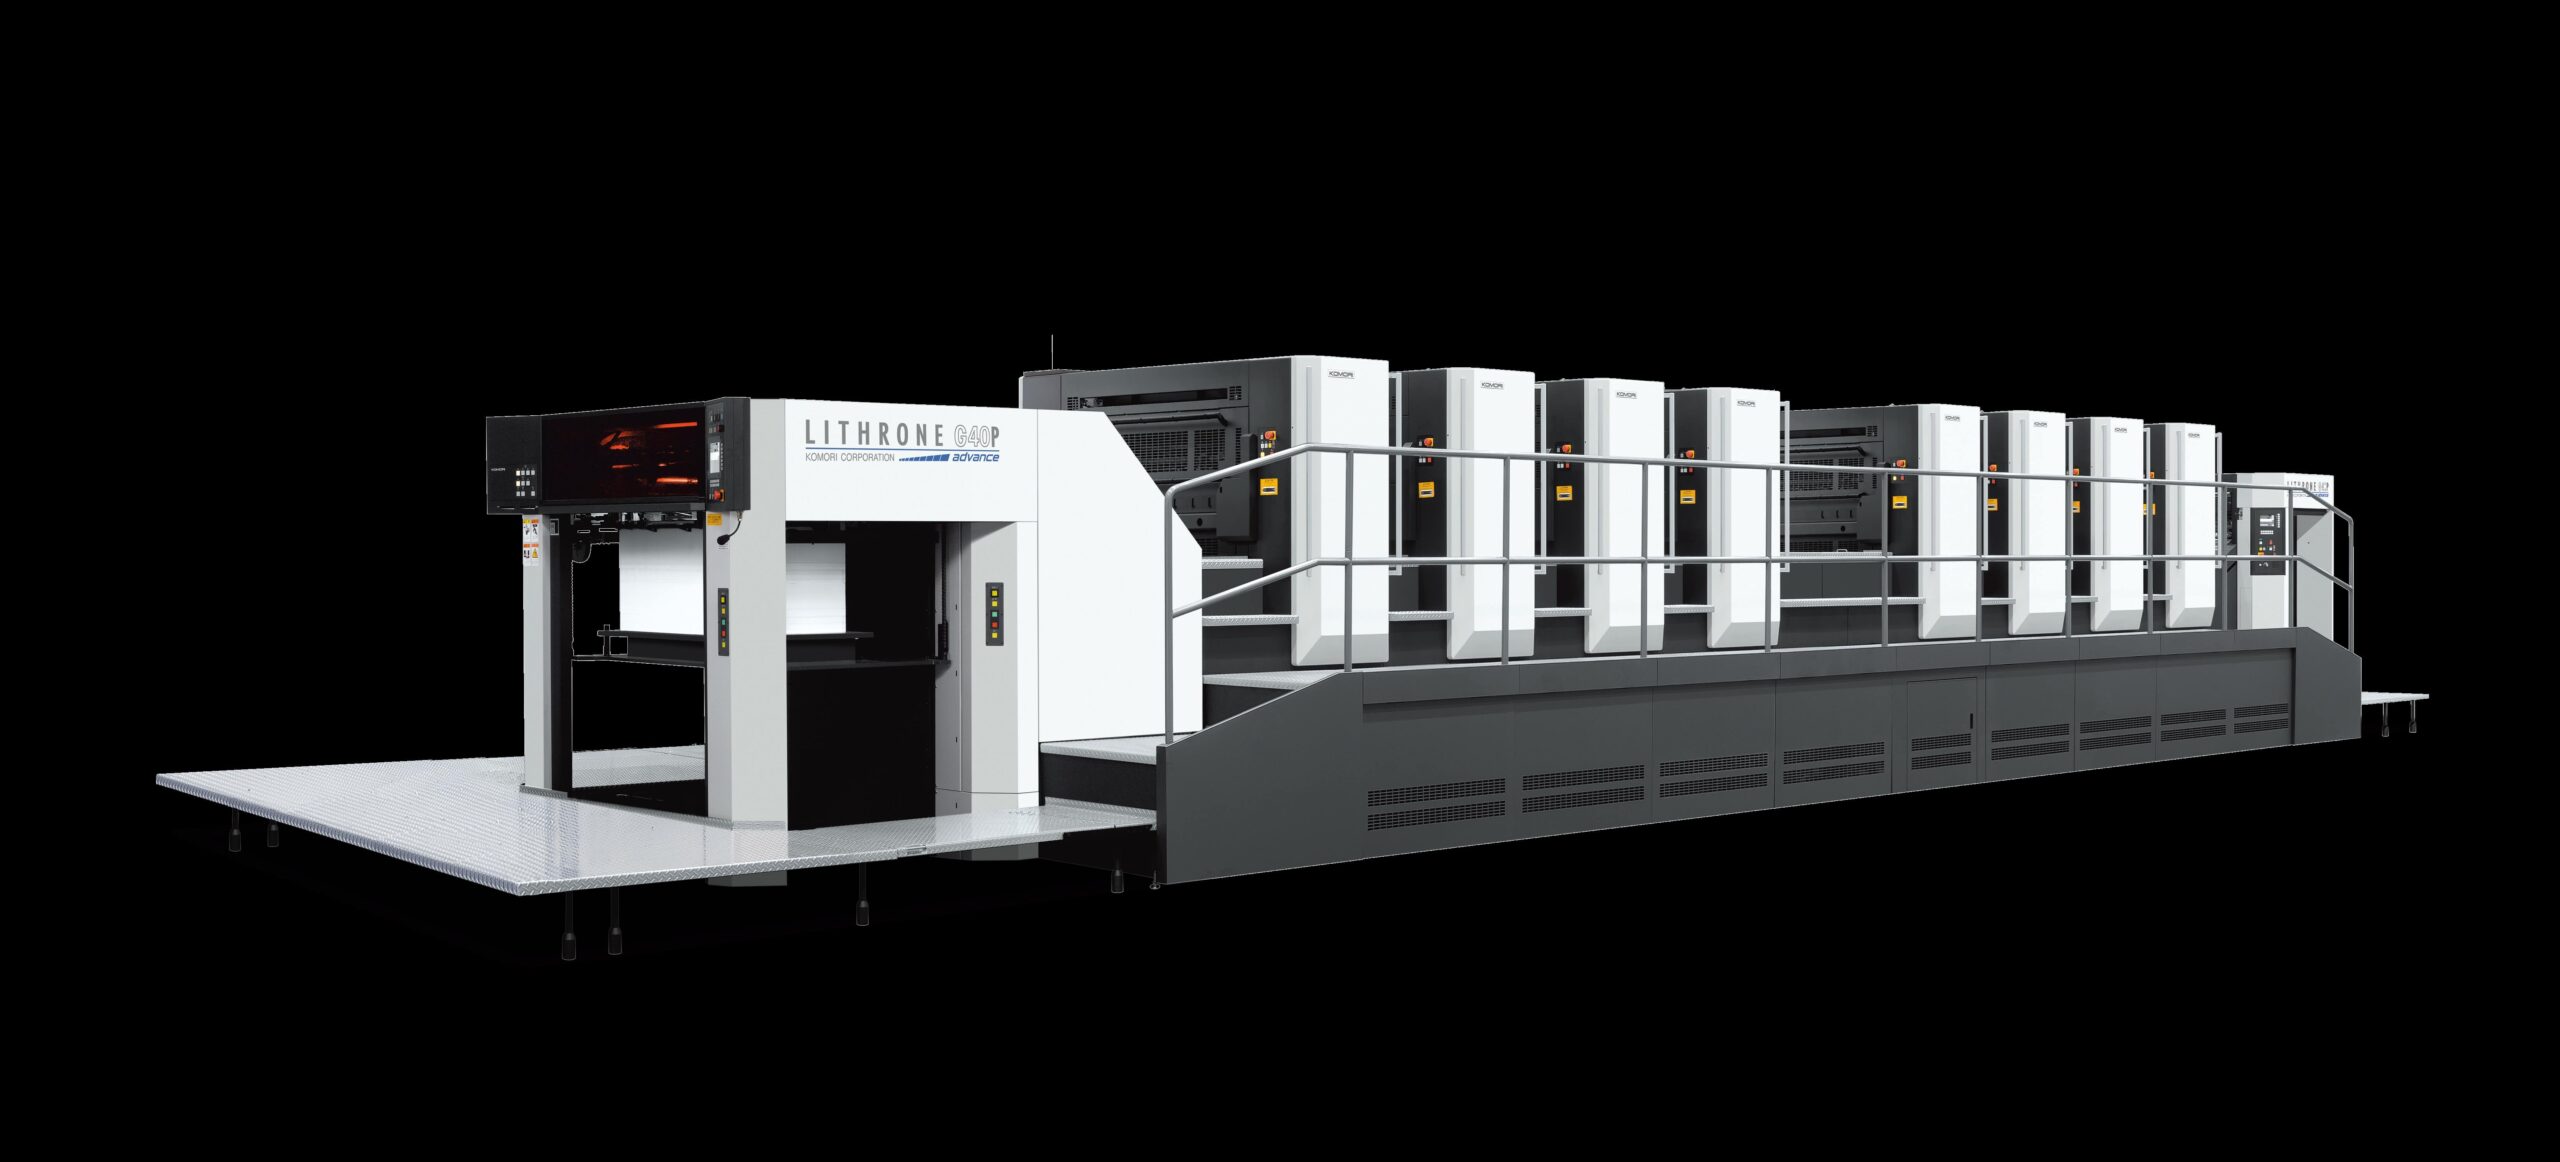 Quantum Graphics Bundles New Komori GL advance Press and MBO T800.1 Buckle Folder to Significantly Enhance Productivity